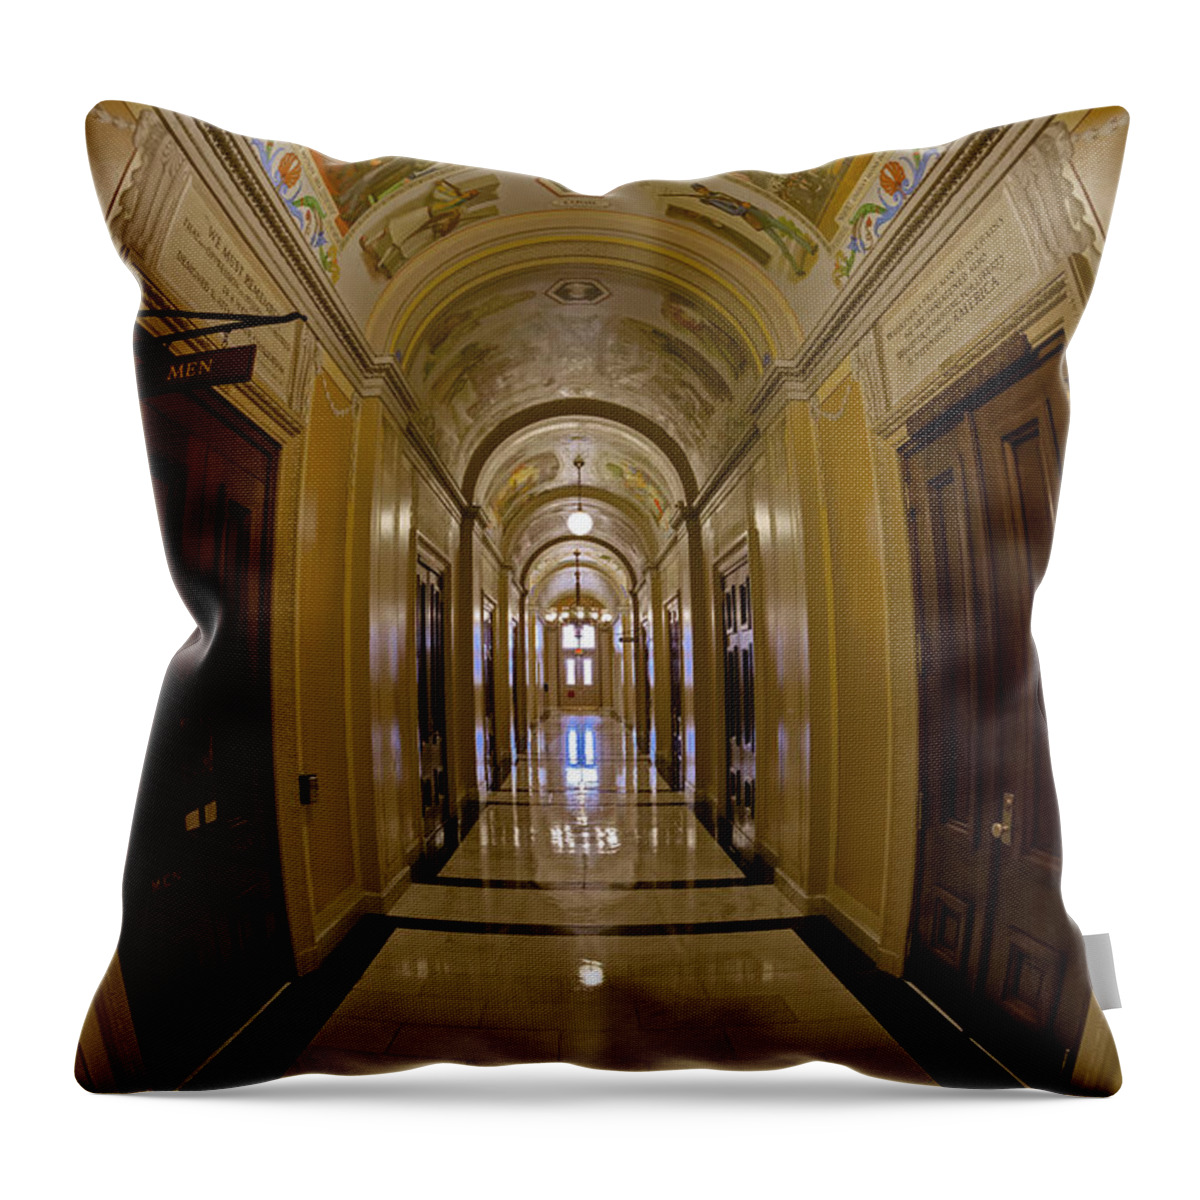 United States House Of Representatives Throw Pillow featuring the photograph United States House of Representatives by Susan Candelario